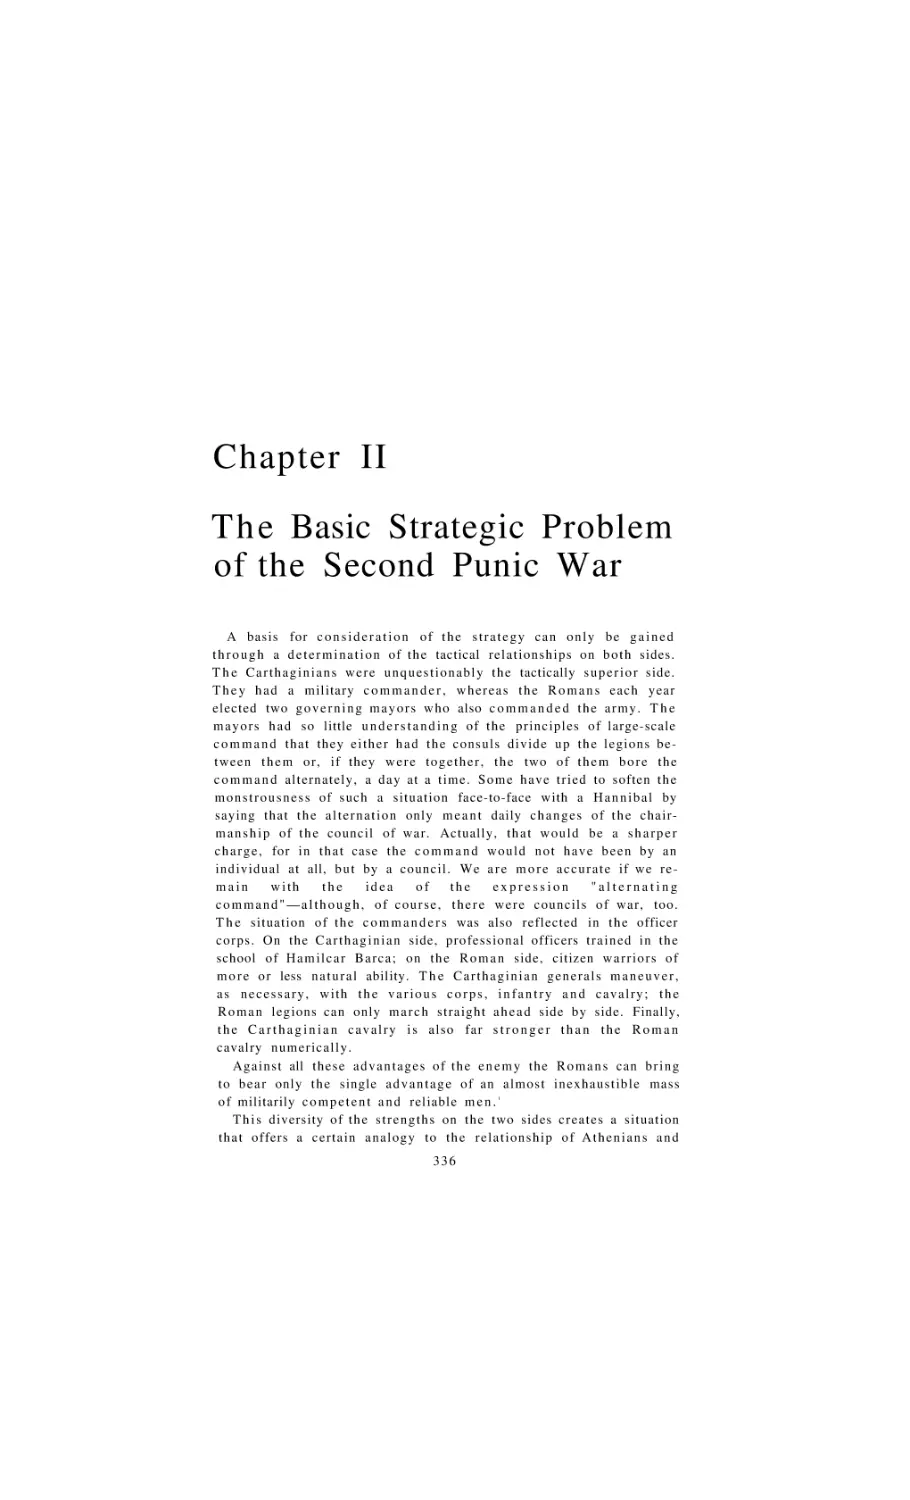 The Basic Strategic Problem of the Second Punic War